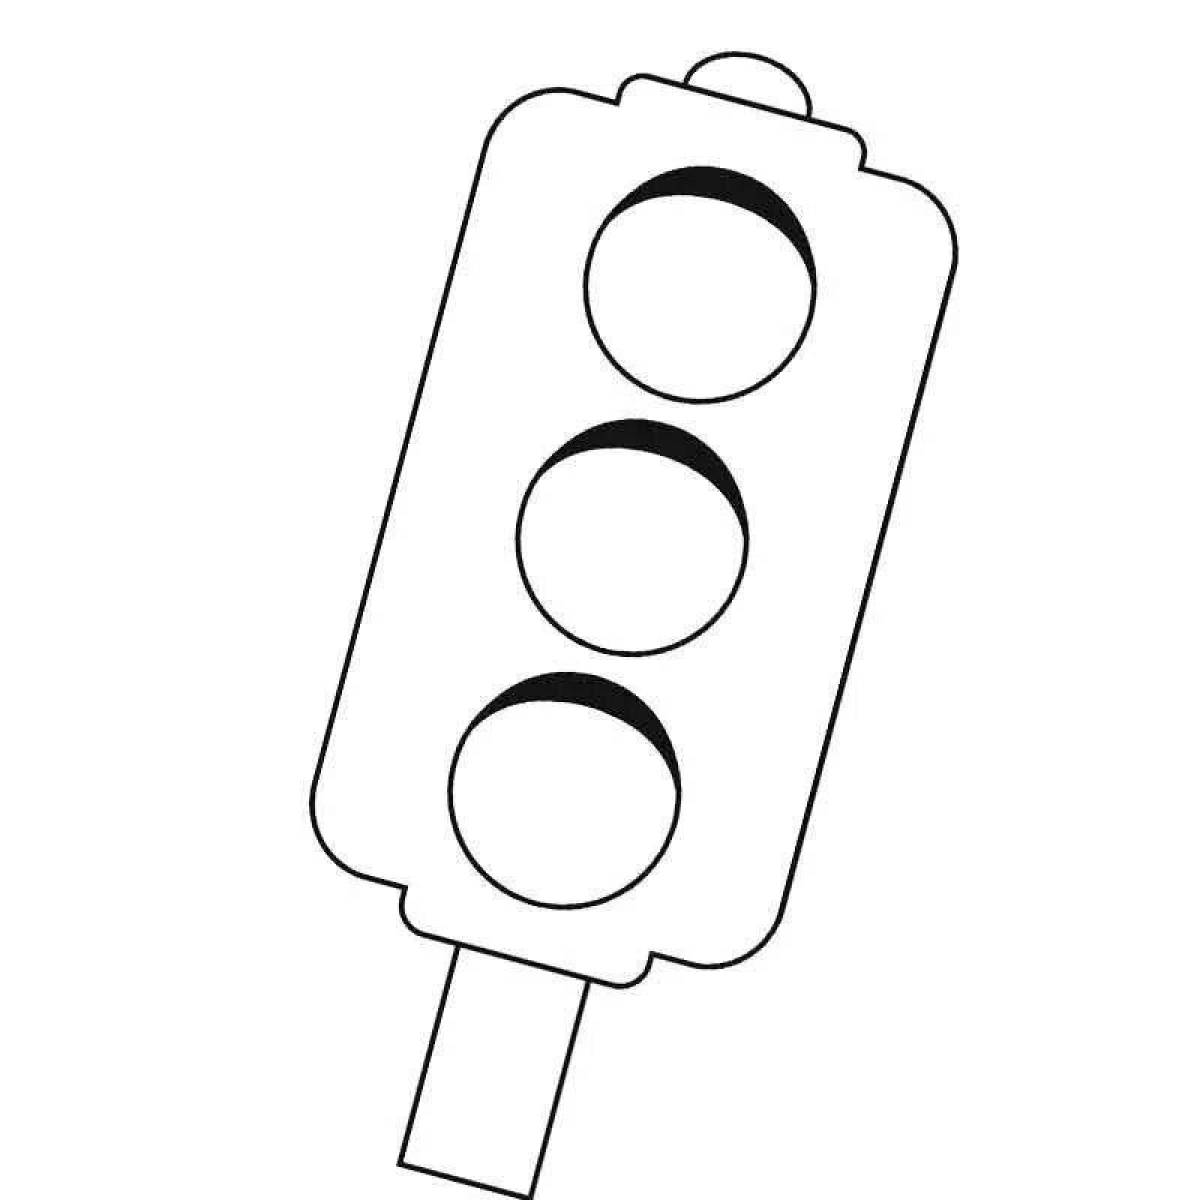 Traffic light picture for kids #2